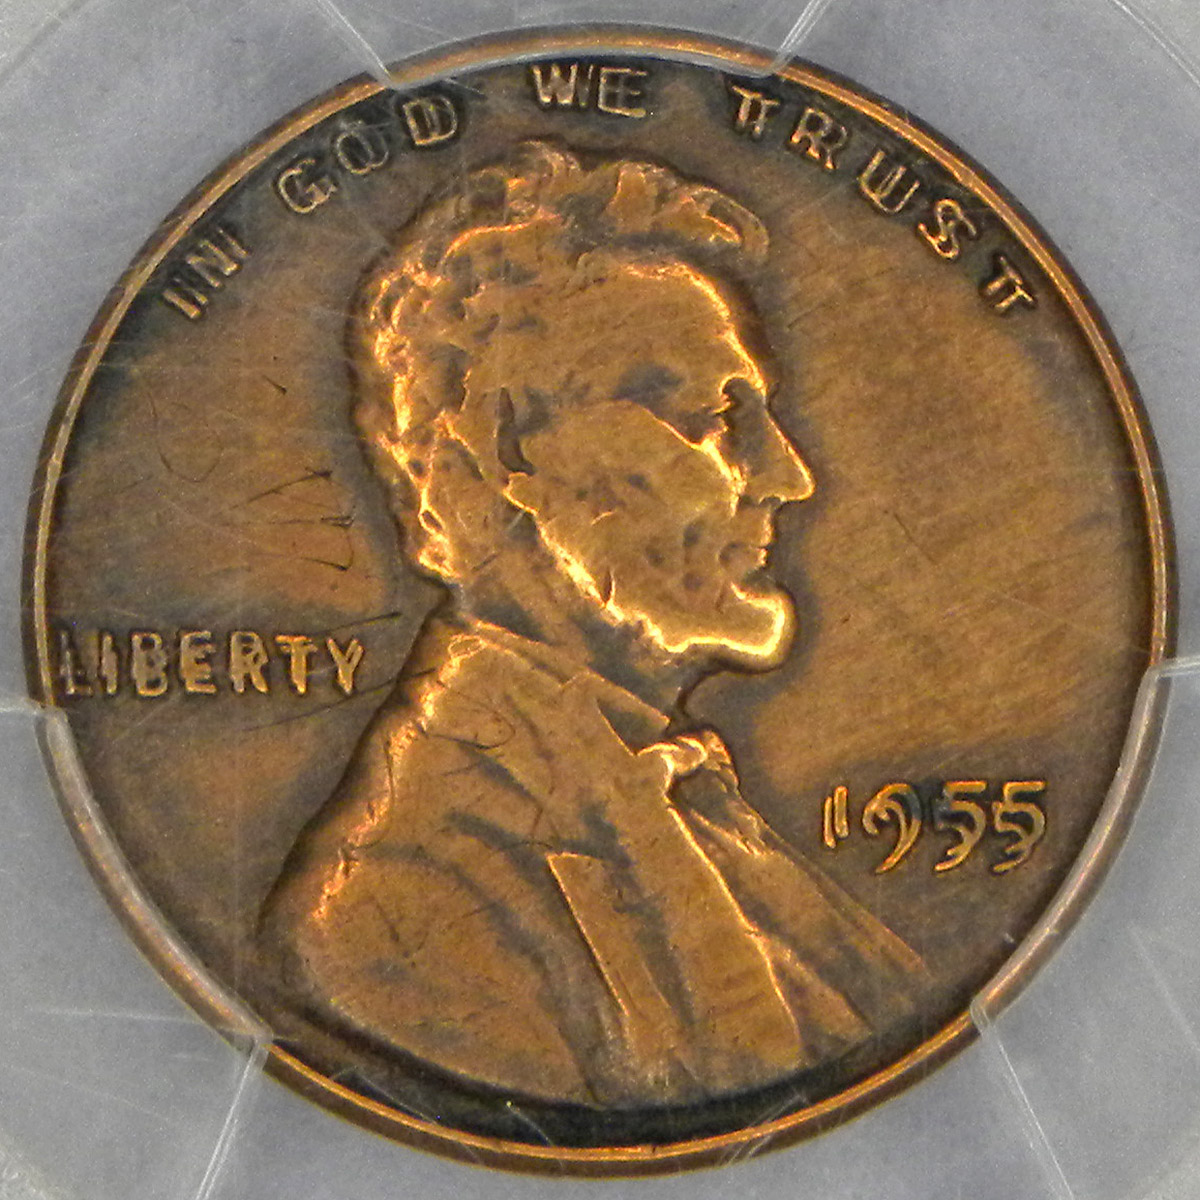 1955 Double Die Lincoln Cent (obverse)